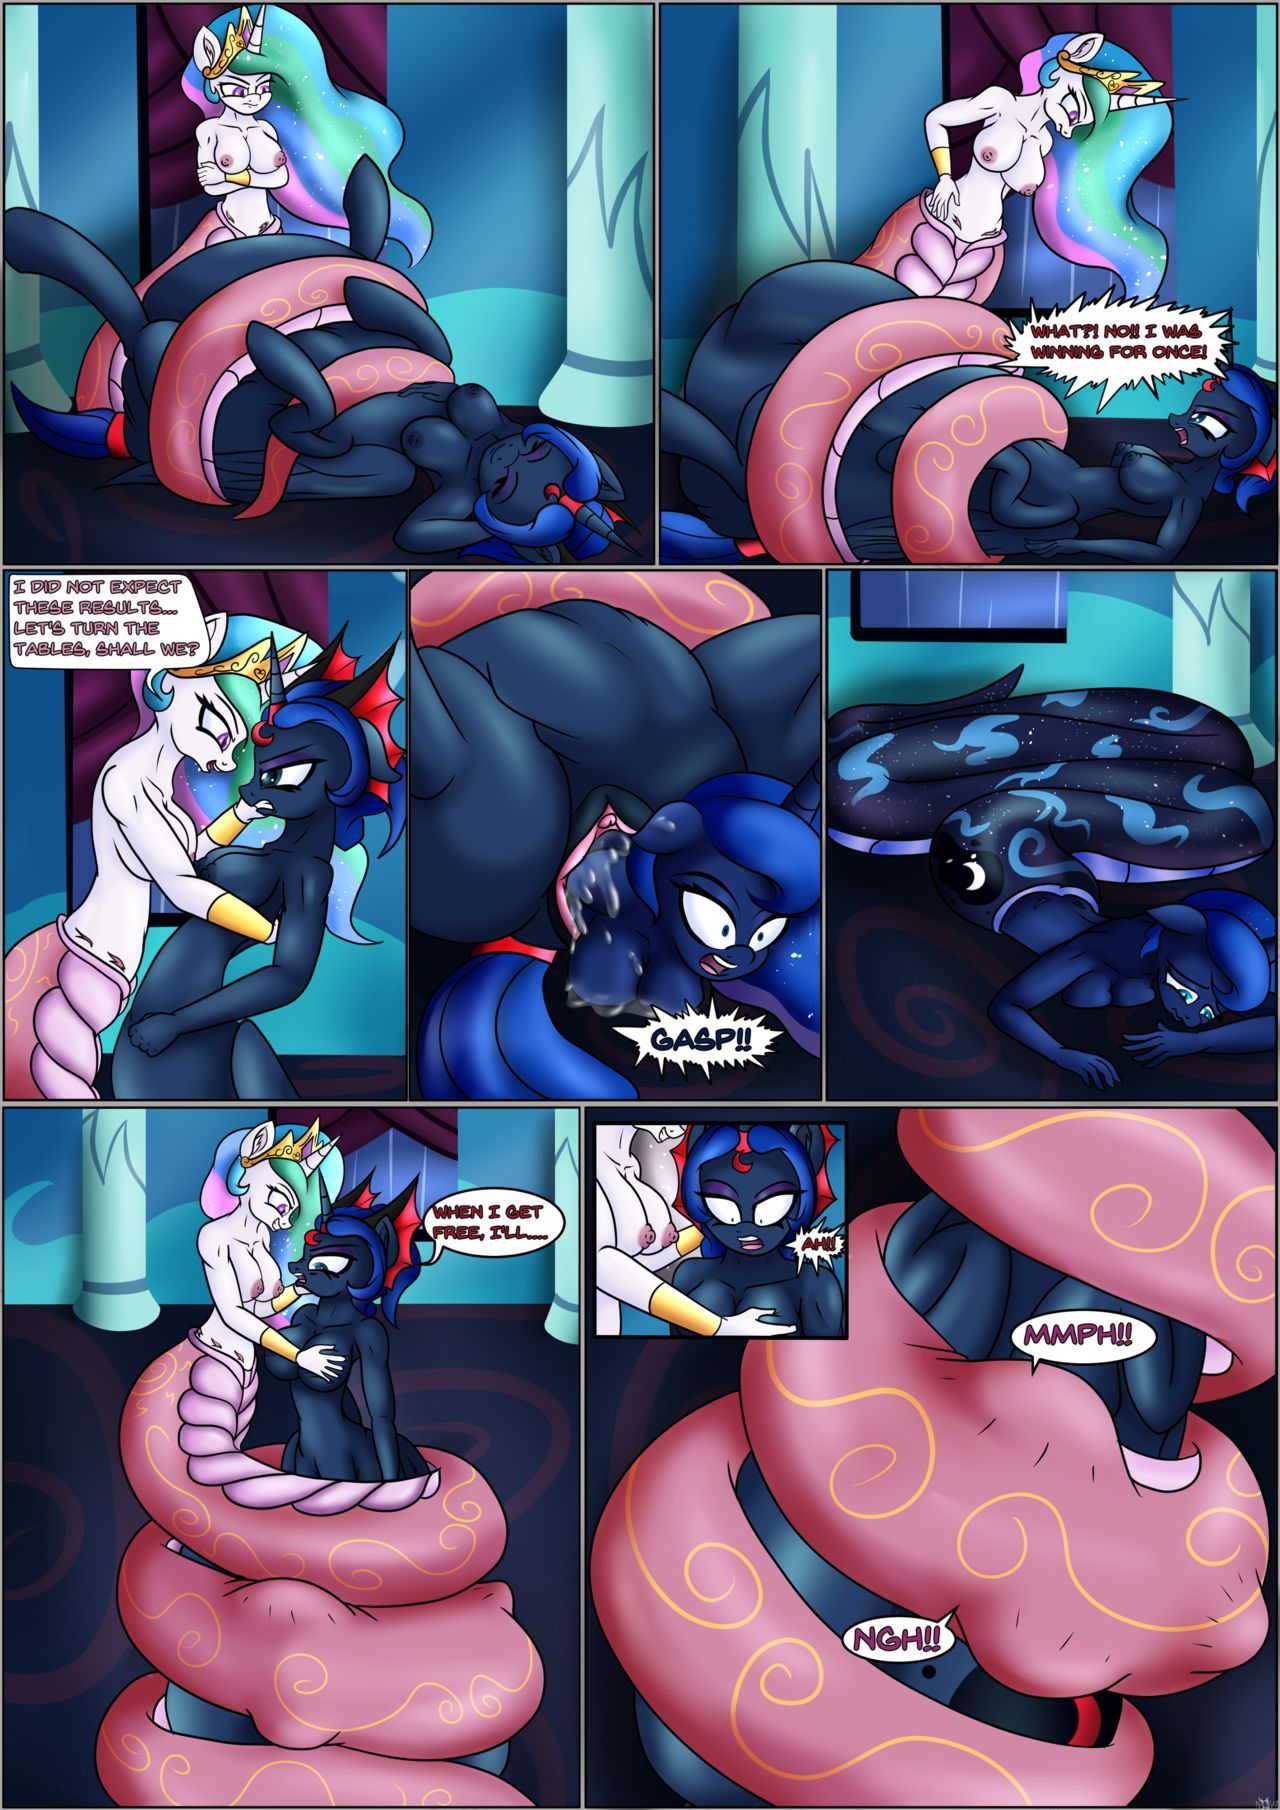 [Novaspark] A Royal Lesson (My Little Pony Friendship Is Magic) [Ongoing] 4